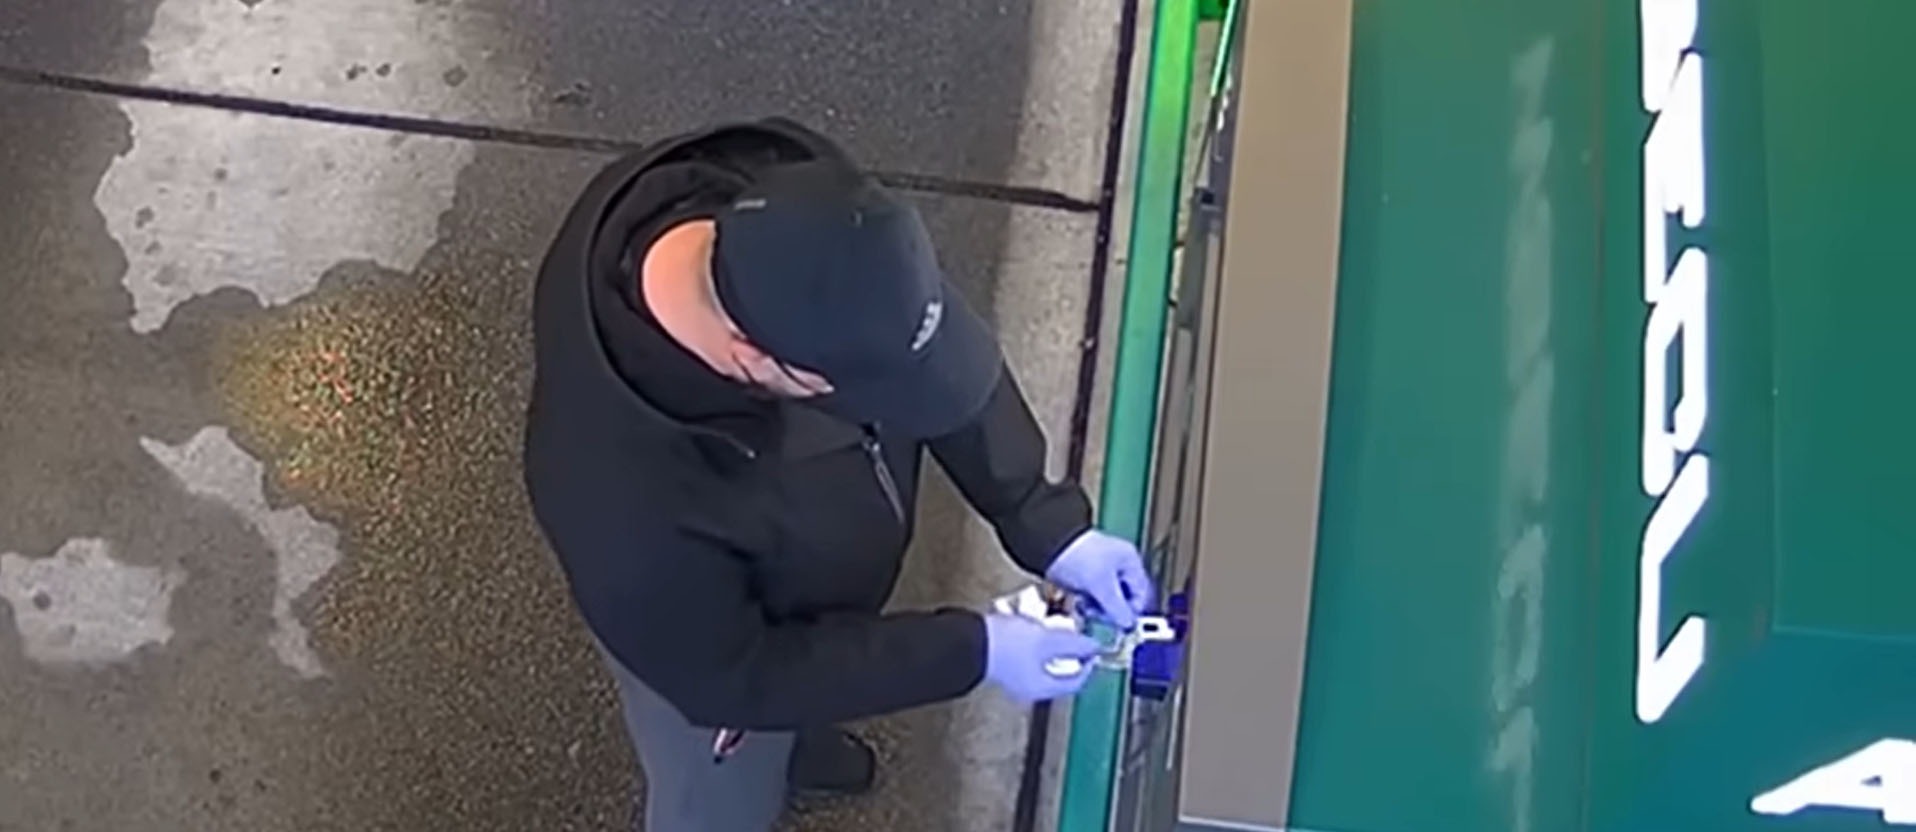 The scammer was caught on video installing the skimmer